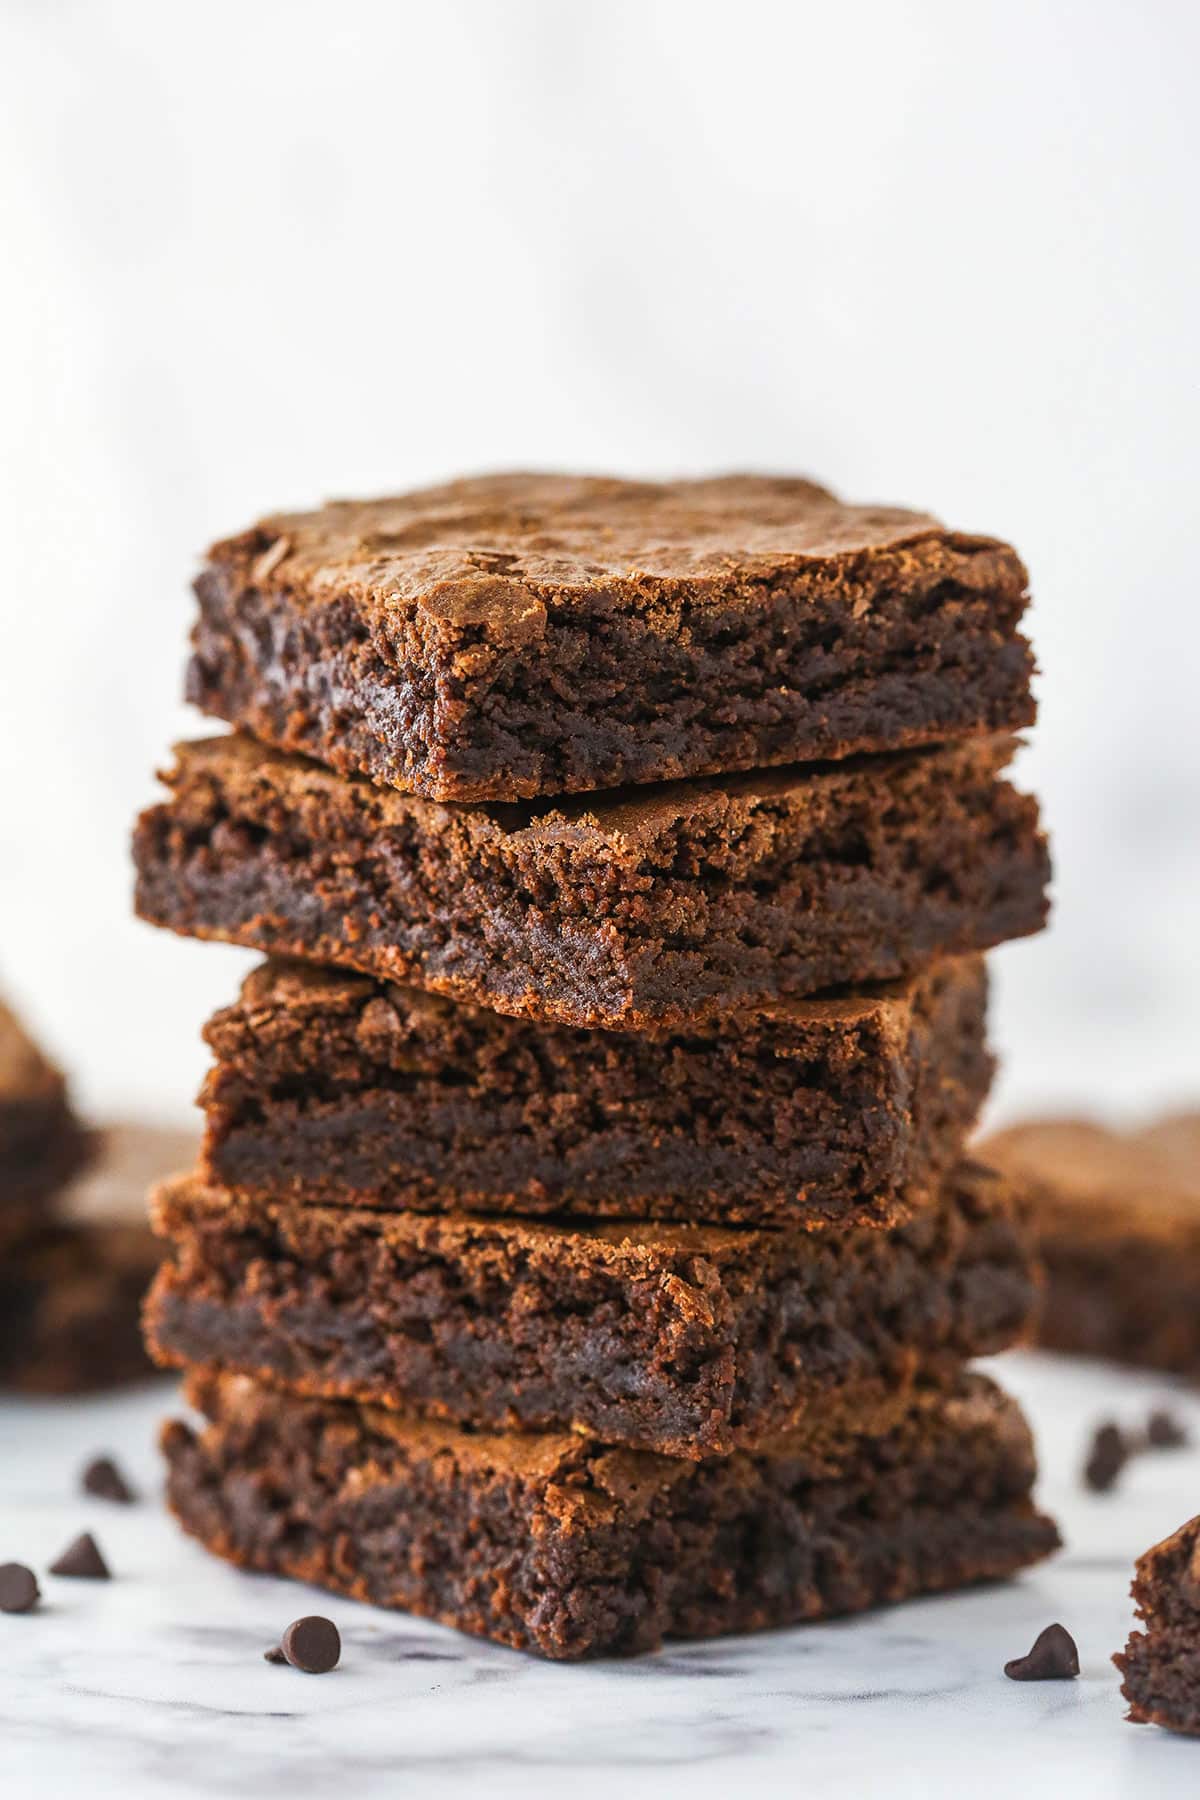 A stack of homemade brownies surrounded by chocolate chips.